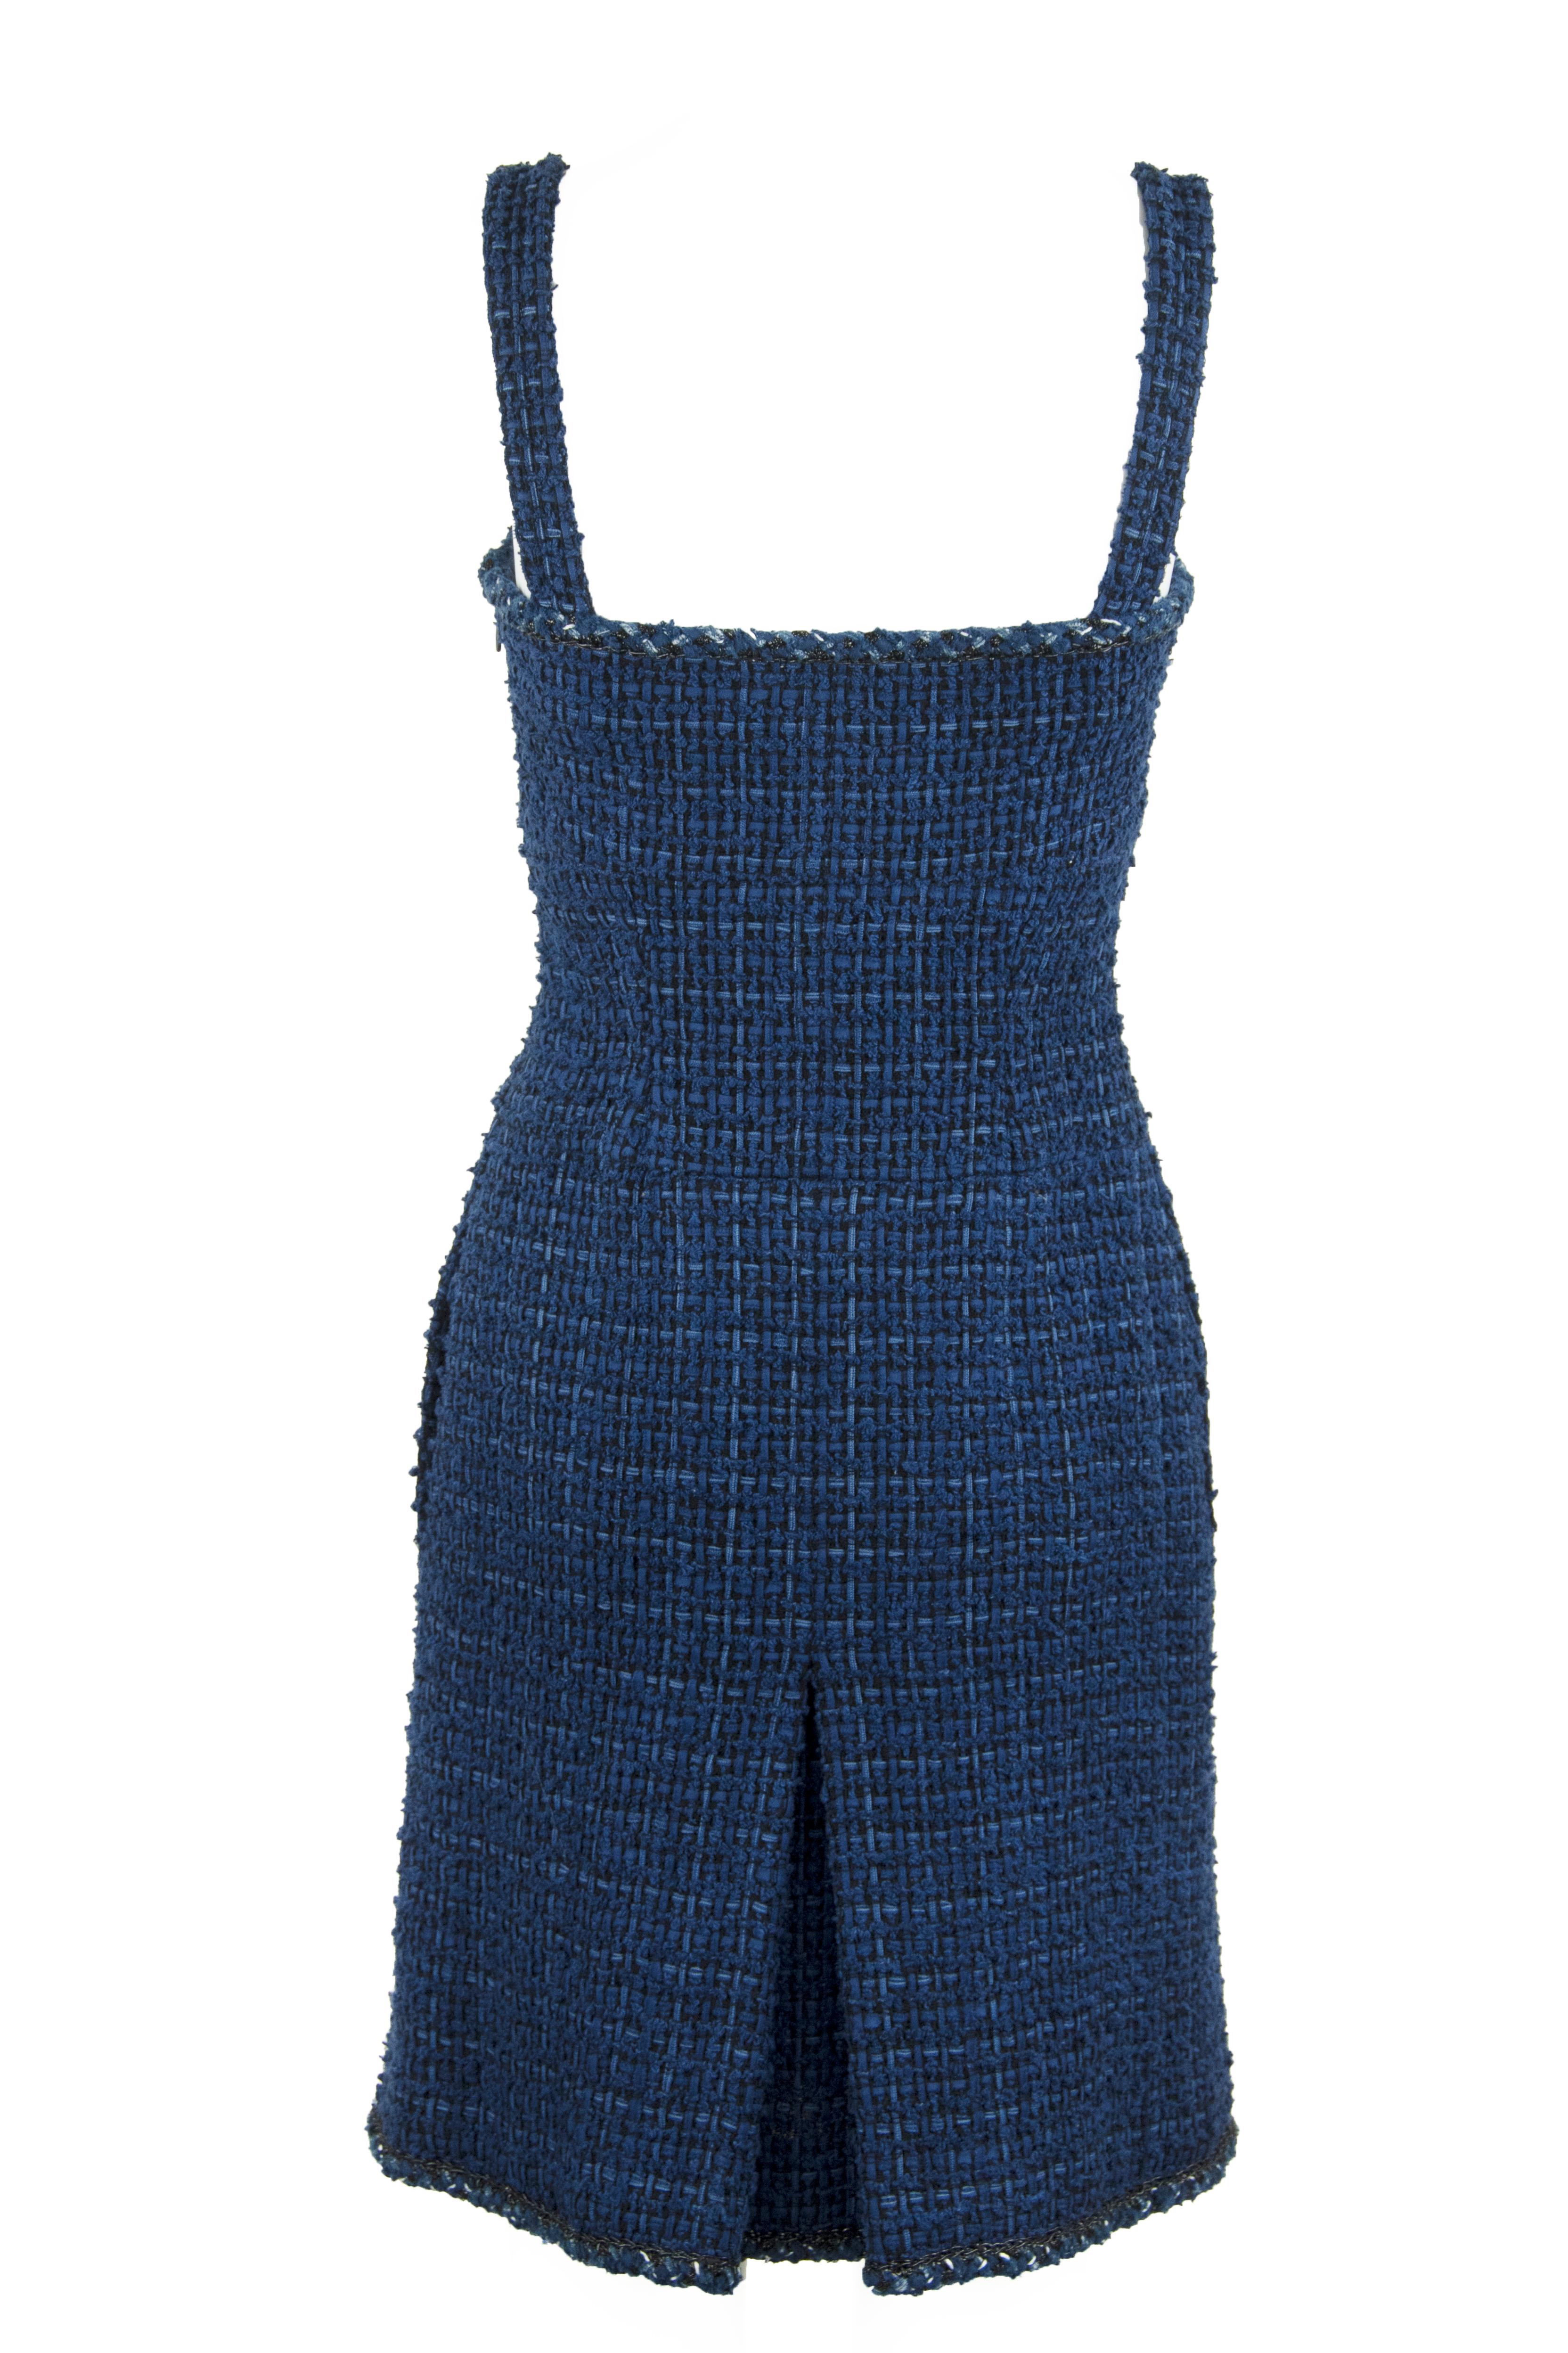 Classic navy Chanel sleeveless dress in a gorgeous cotton tweed with silk lining.  Features a large inverted pleat in the front and back.  Excellent choice for a luncheon, would look beautiful styled with a large hat.

Size: FR 36

Condition: